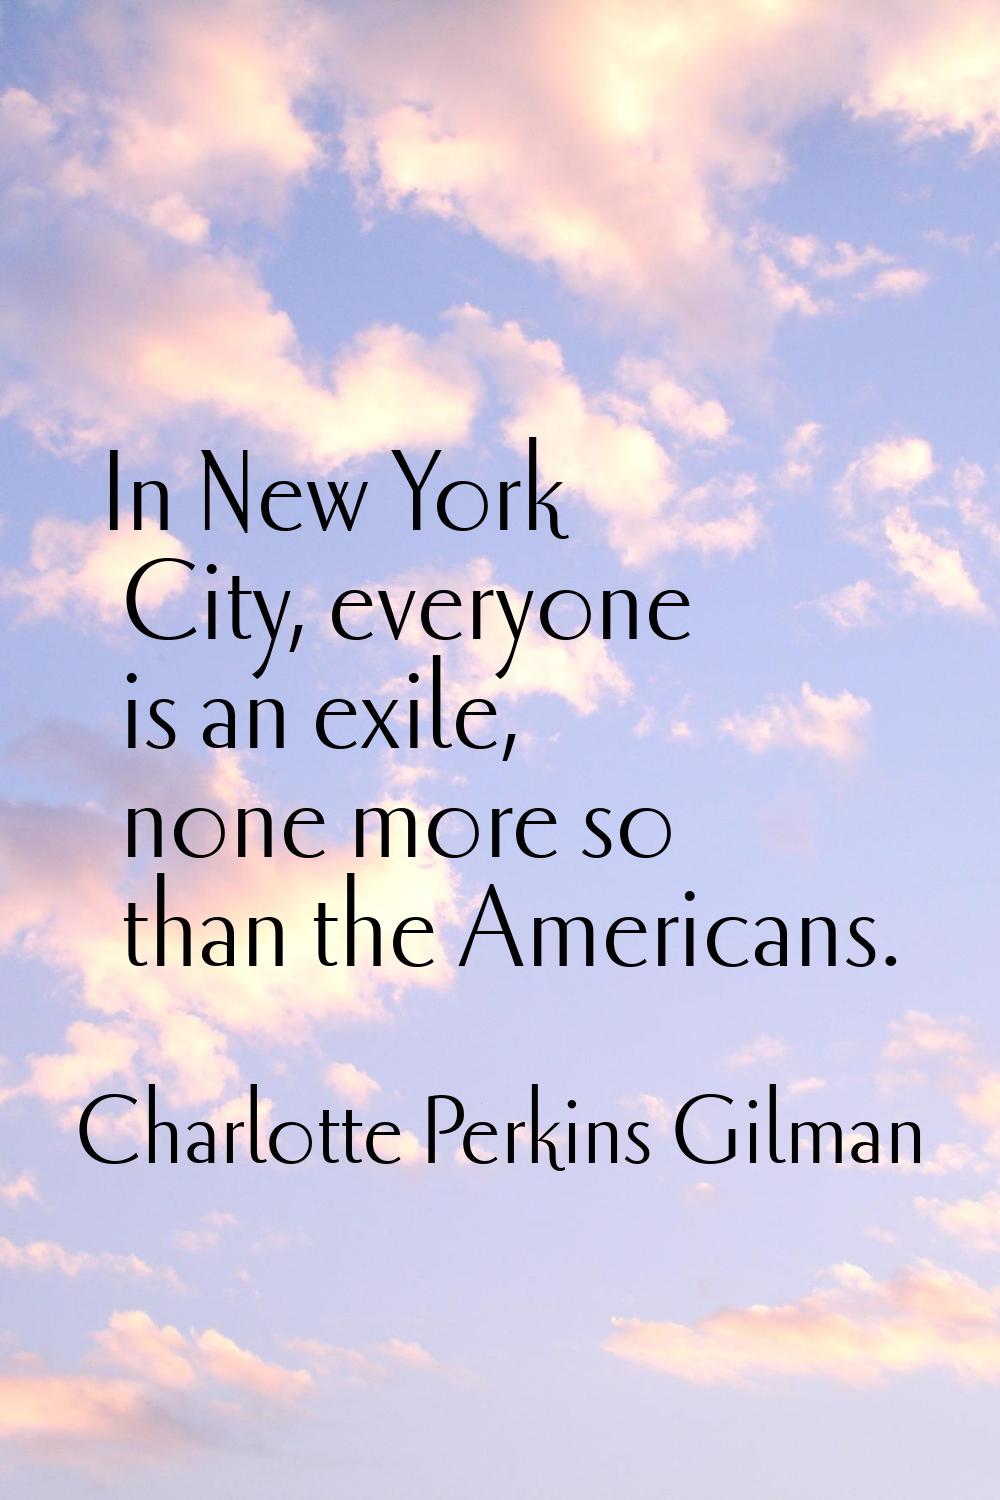 In New York City, everyone is an exile, none more so than the Americans.